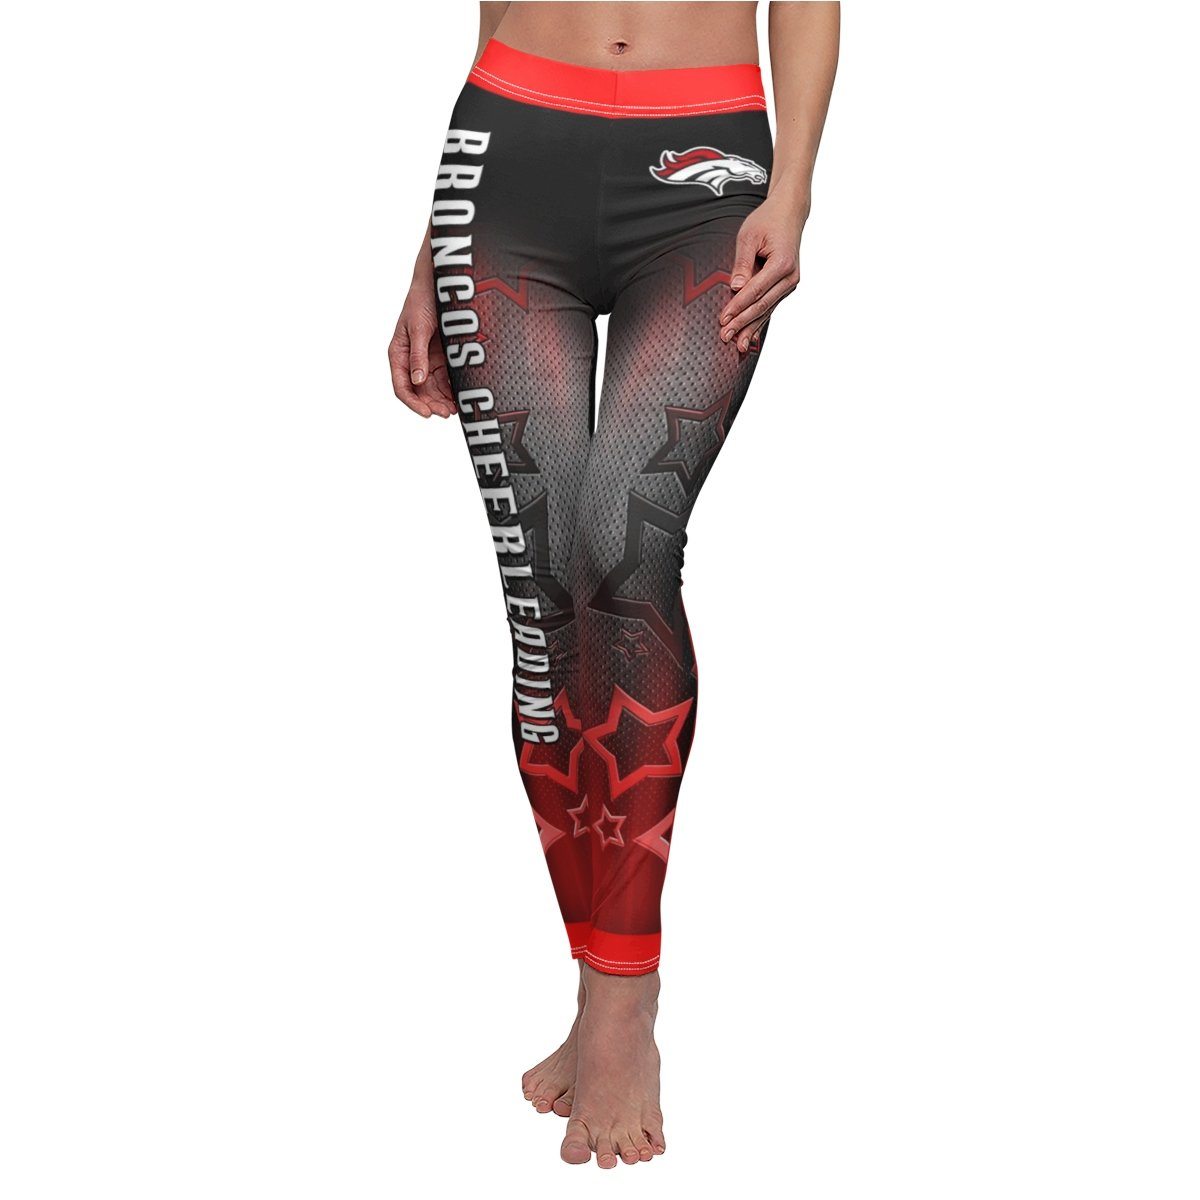 Metal Stars - V.4 - Extreme Sportswear Cut & Sew Leggings Template-Photoshop Template - Photo Solutions